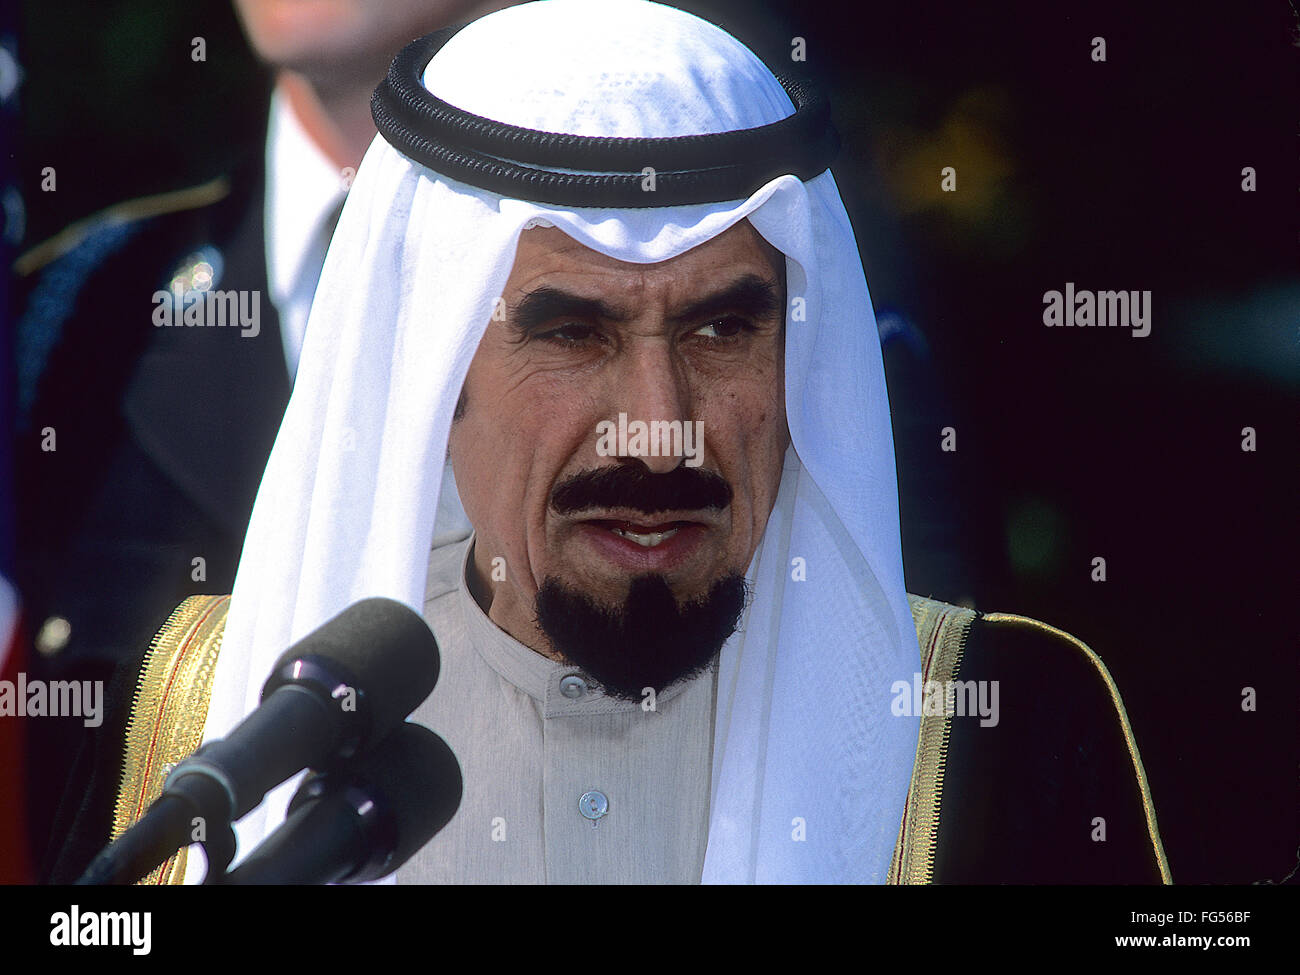 Washington, DC., USA, 28th September, 1990  The Emir of Kuwait Sheik Jaber III Al-Ahmad Al-Jaber Al-Sabah speaks to the press on the South Lawn of the White House during visit after the invasion of Kuwait by Iraq. The war is also known under other names, such as the Persian Gulf War, First Gulf War, Gulf War I, Kuwait War, or the First Iraq War, before the term 'Iraq War' became identified instead with the 2003 Iraq War (also referred to in the U.S. as 'Operation Iraqi Freedom'). Credit: Mark Reinstein Stock Photo